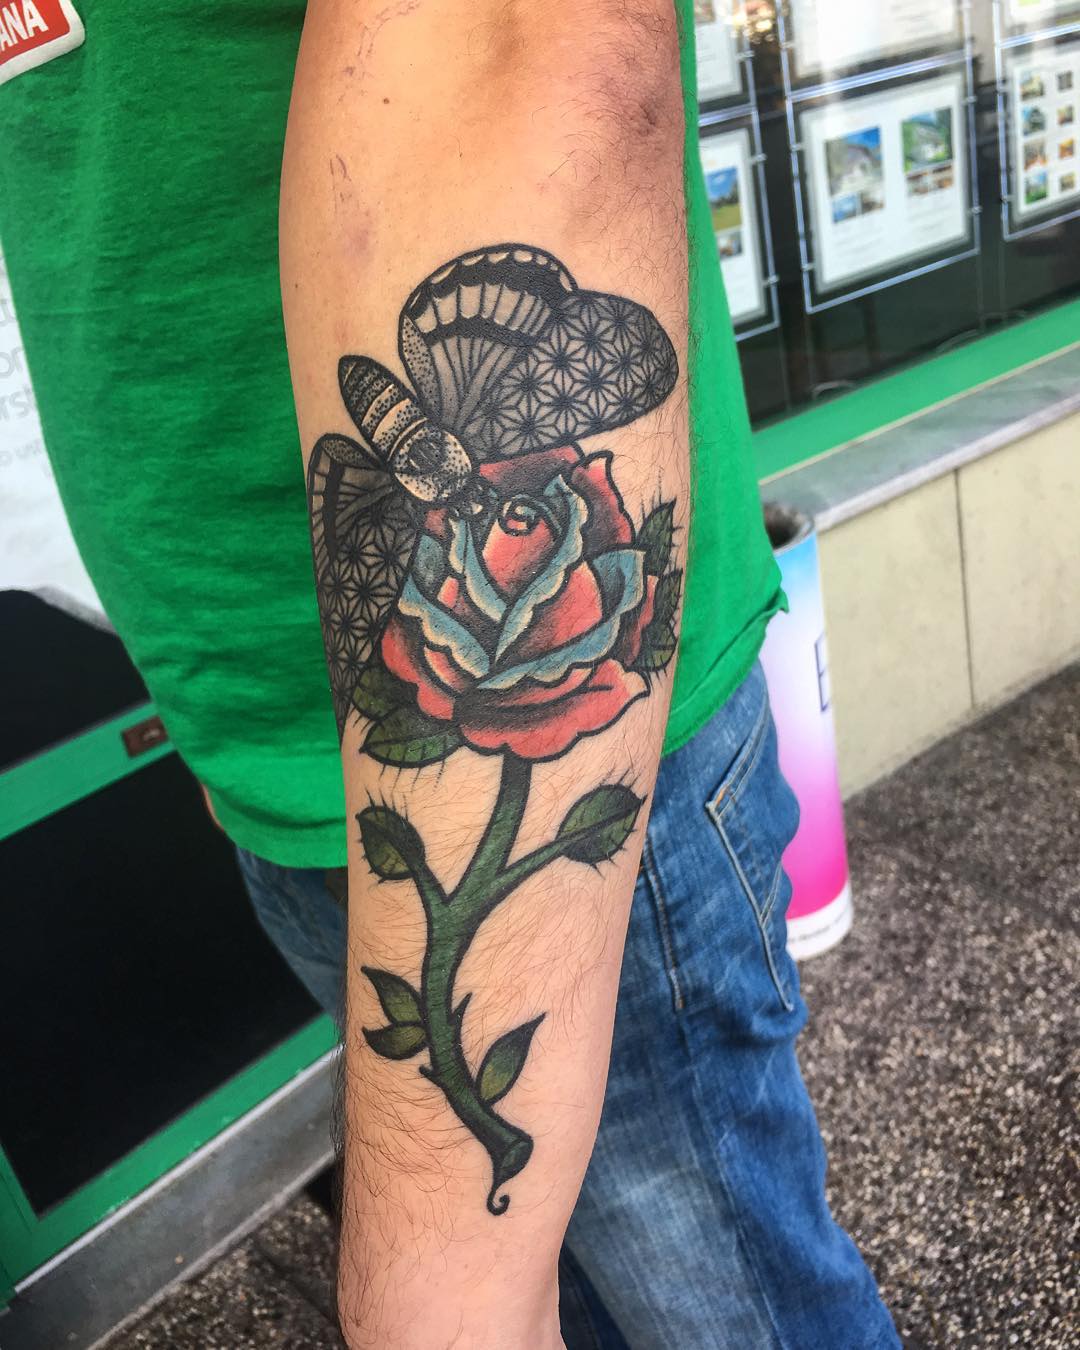 a classical tattoo plot - a butterfly sitting on the rose